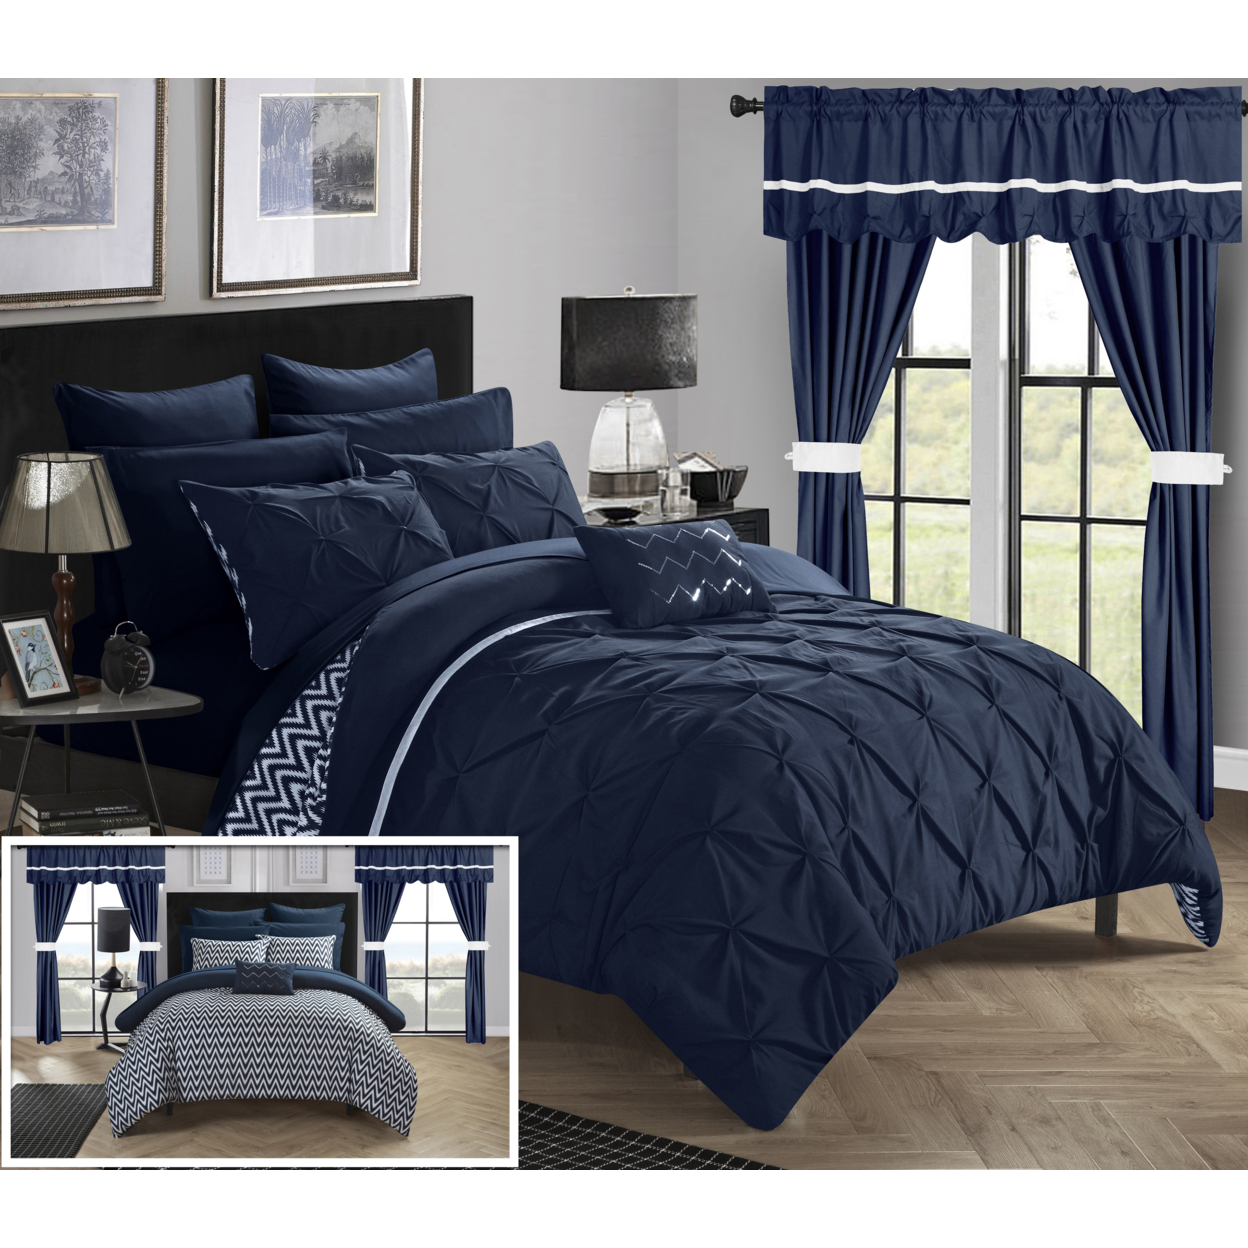 Chic Home 20 Piece Fortville Complete Bed Room In A Bag Super Set. Pinch Pleated Design REVERSIBLE Comforter Set With Decorative Pillows. -